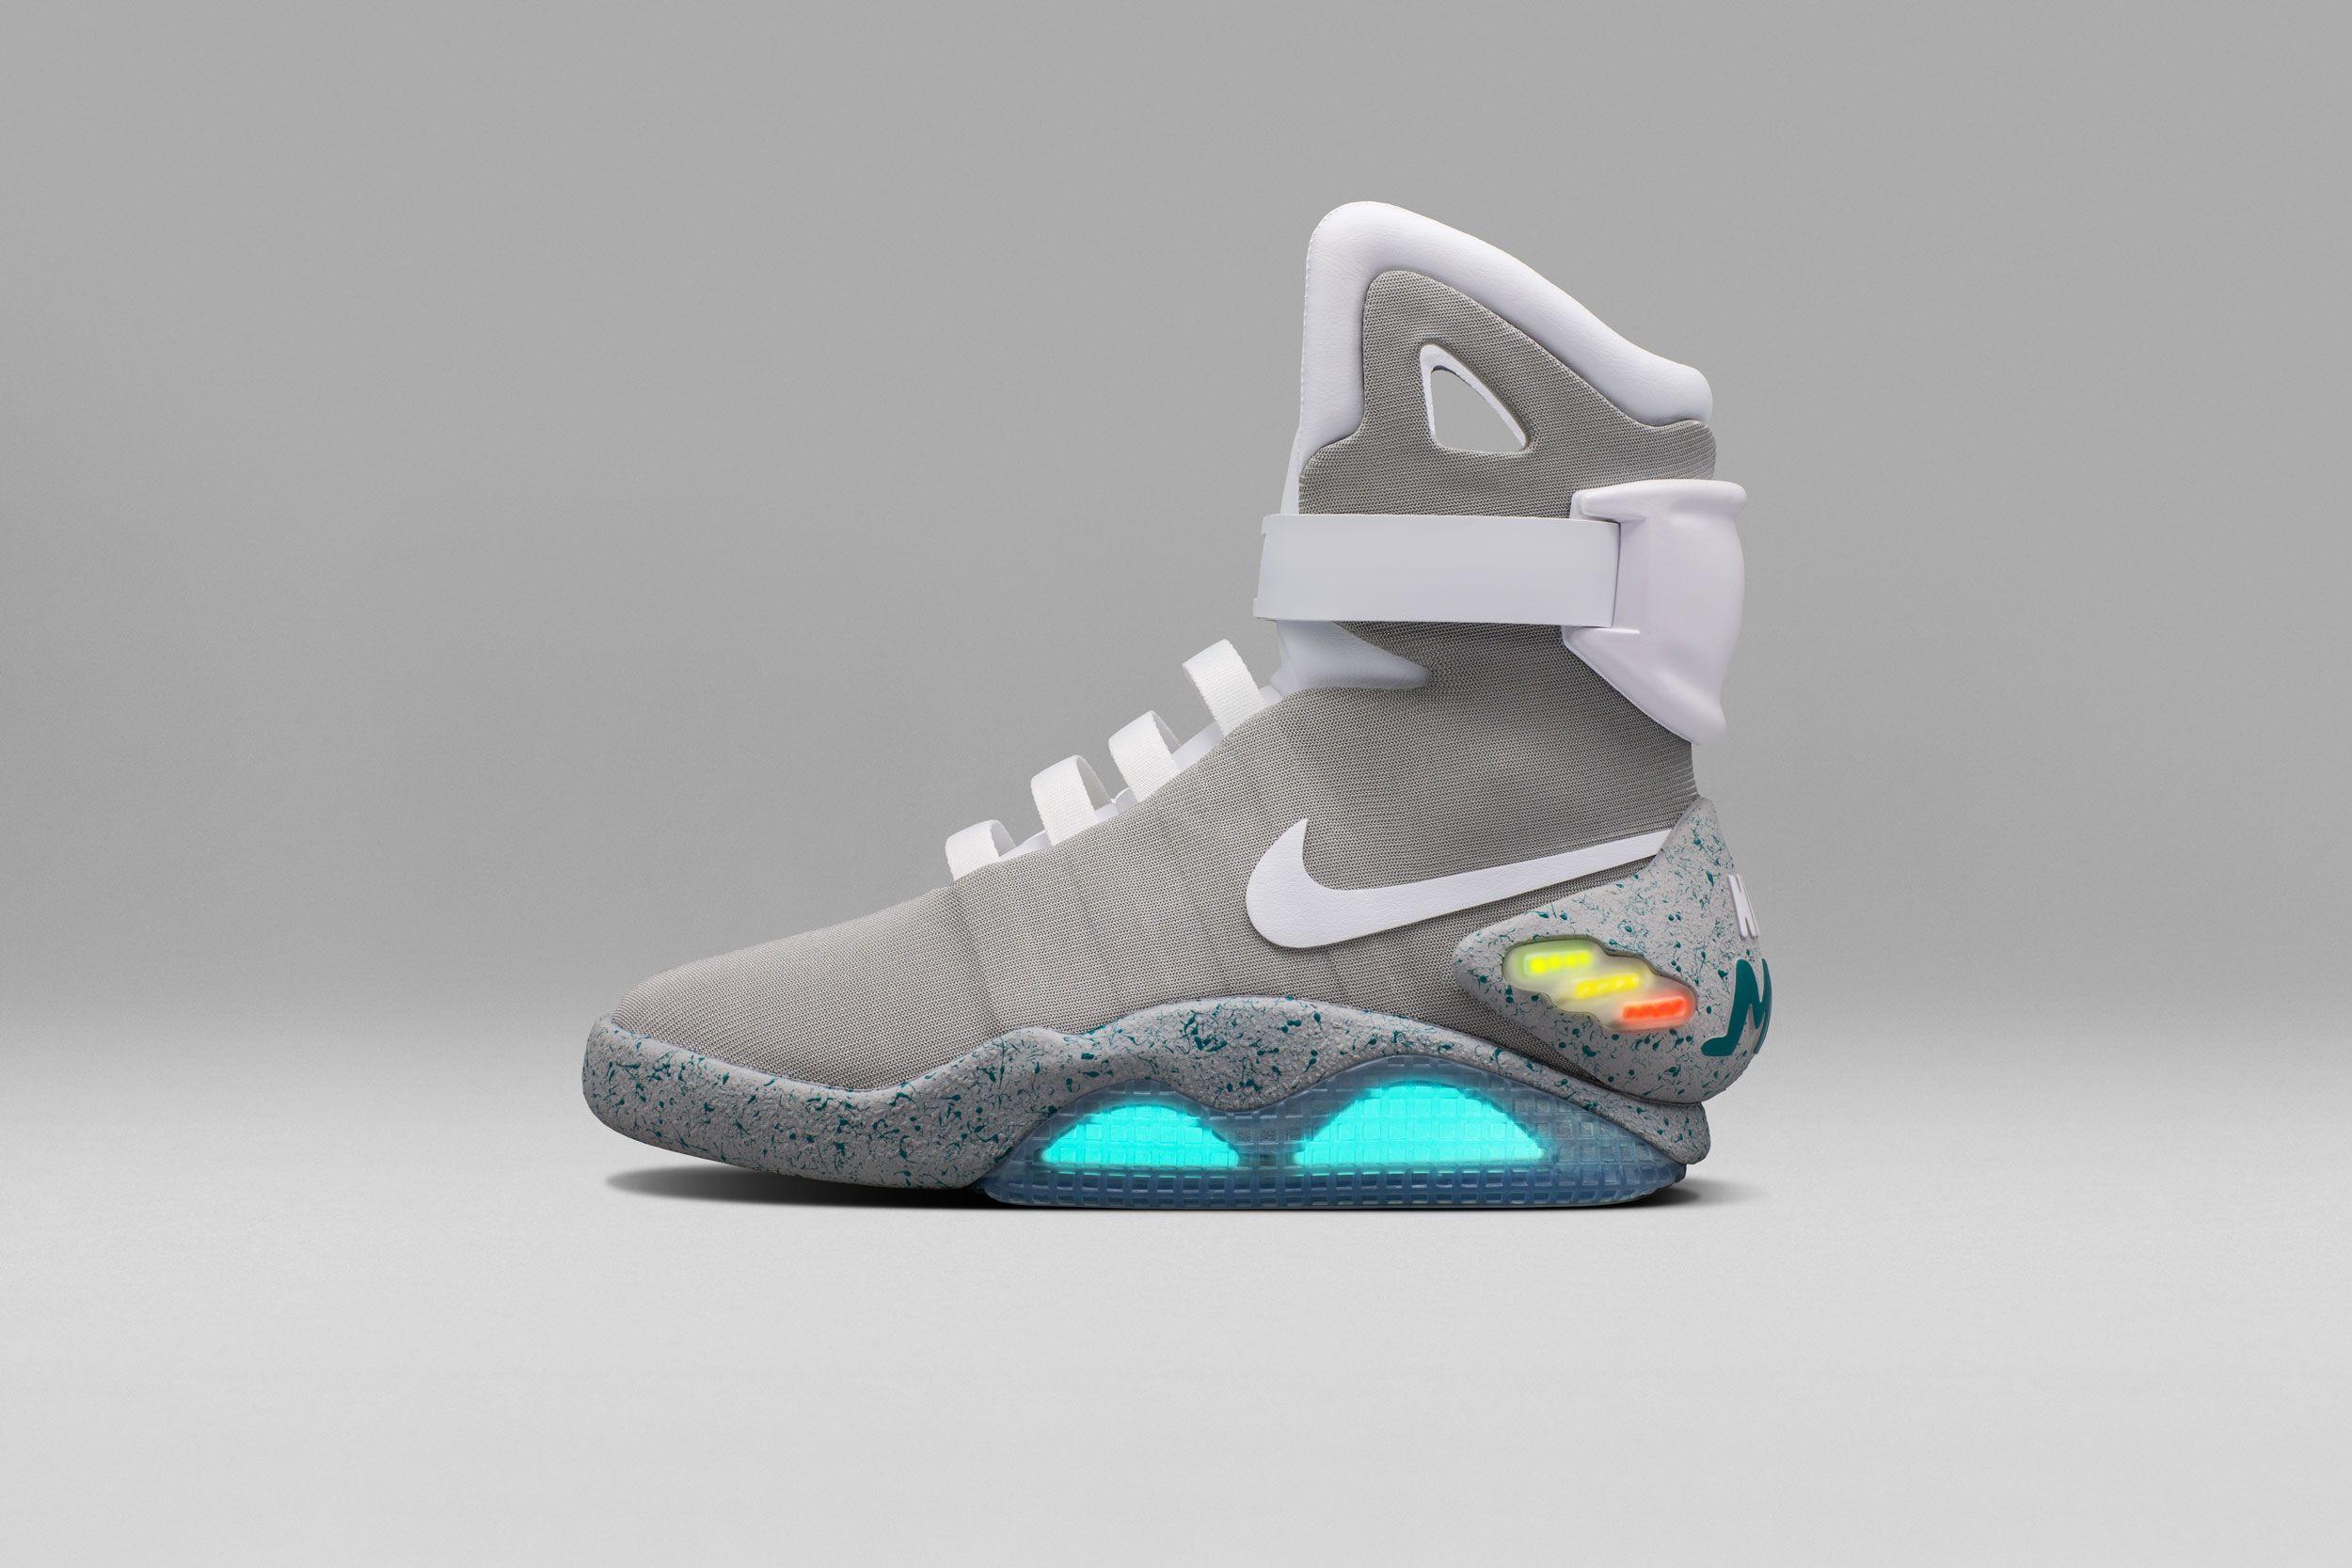 How to Get the 2016 Nike Mag